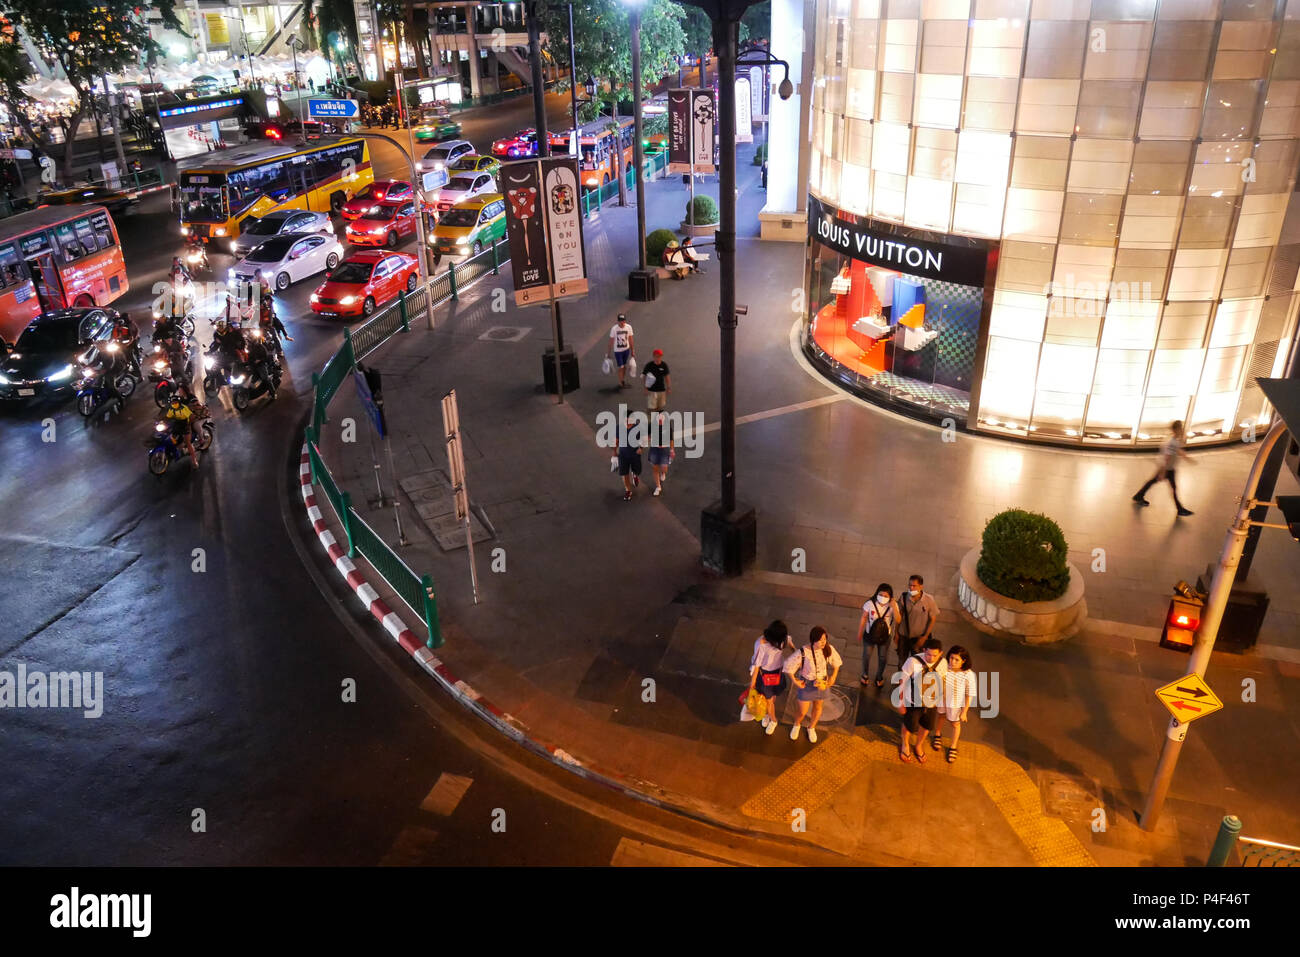 BANGKOK, THAILAND - MARCH 12, 2017: Ratchaprasong Intersection, shopping mall district in Bangkok, Thailand early in the evening and traffic jam Stock Photo